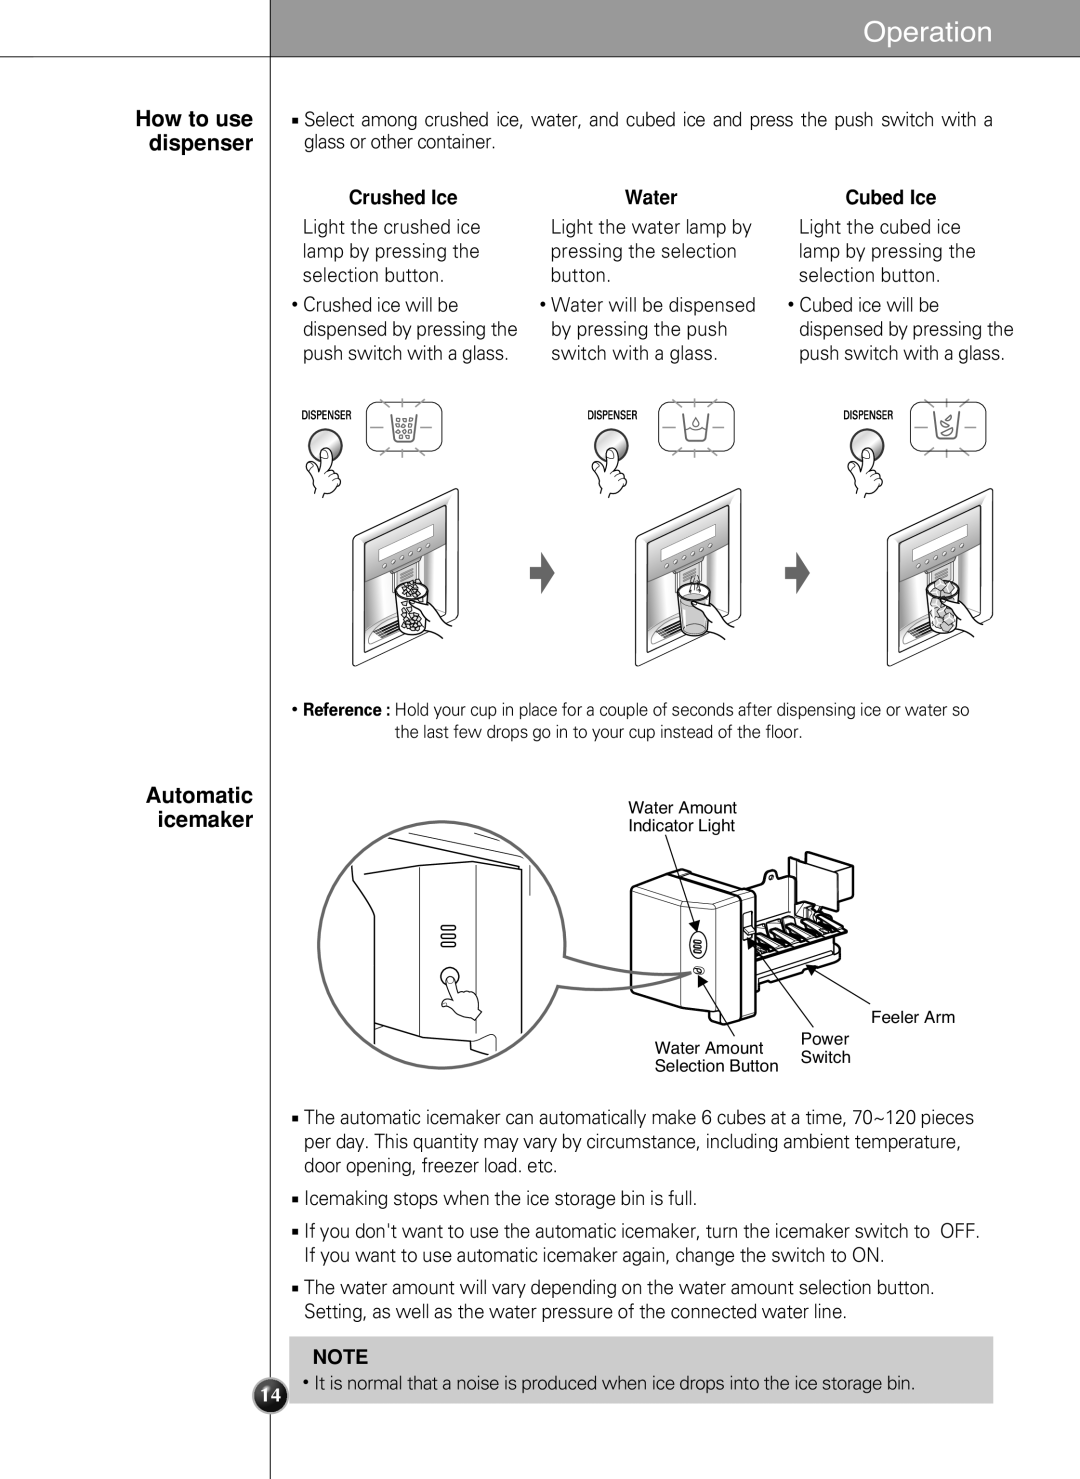 LG Electronics LSC 27950SB, LSC 27950ST manual How to use dispenser, Automatic icemaker, Operation, Crushed Ice, Water 